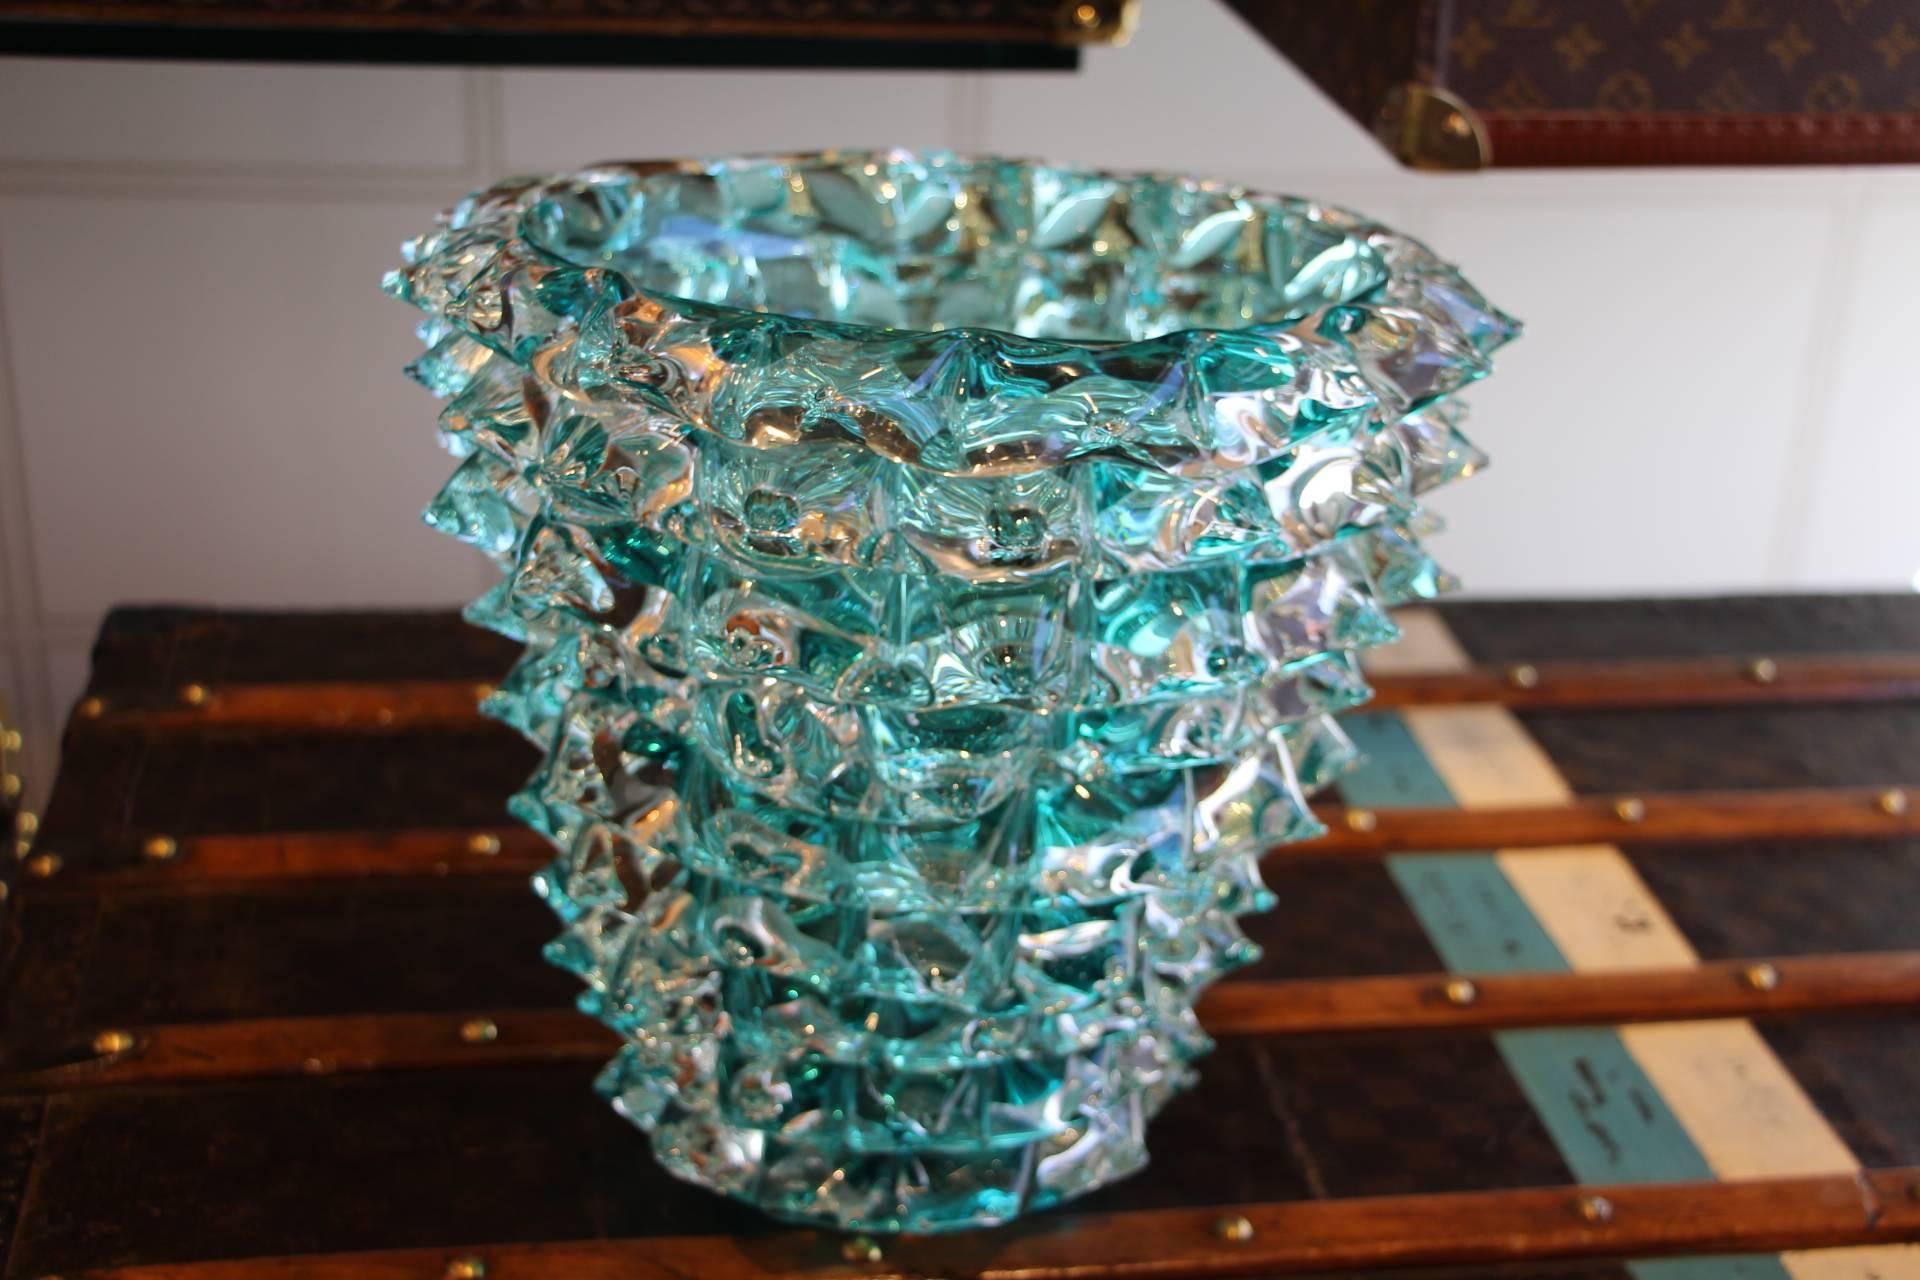 Late 20th Century Turquoise Blue Vase in Murano Glass with Spikes Decor, Barovier Style, Rostrato